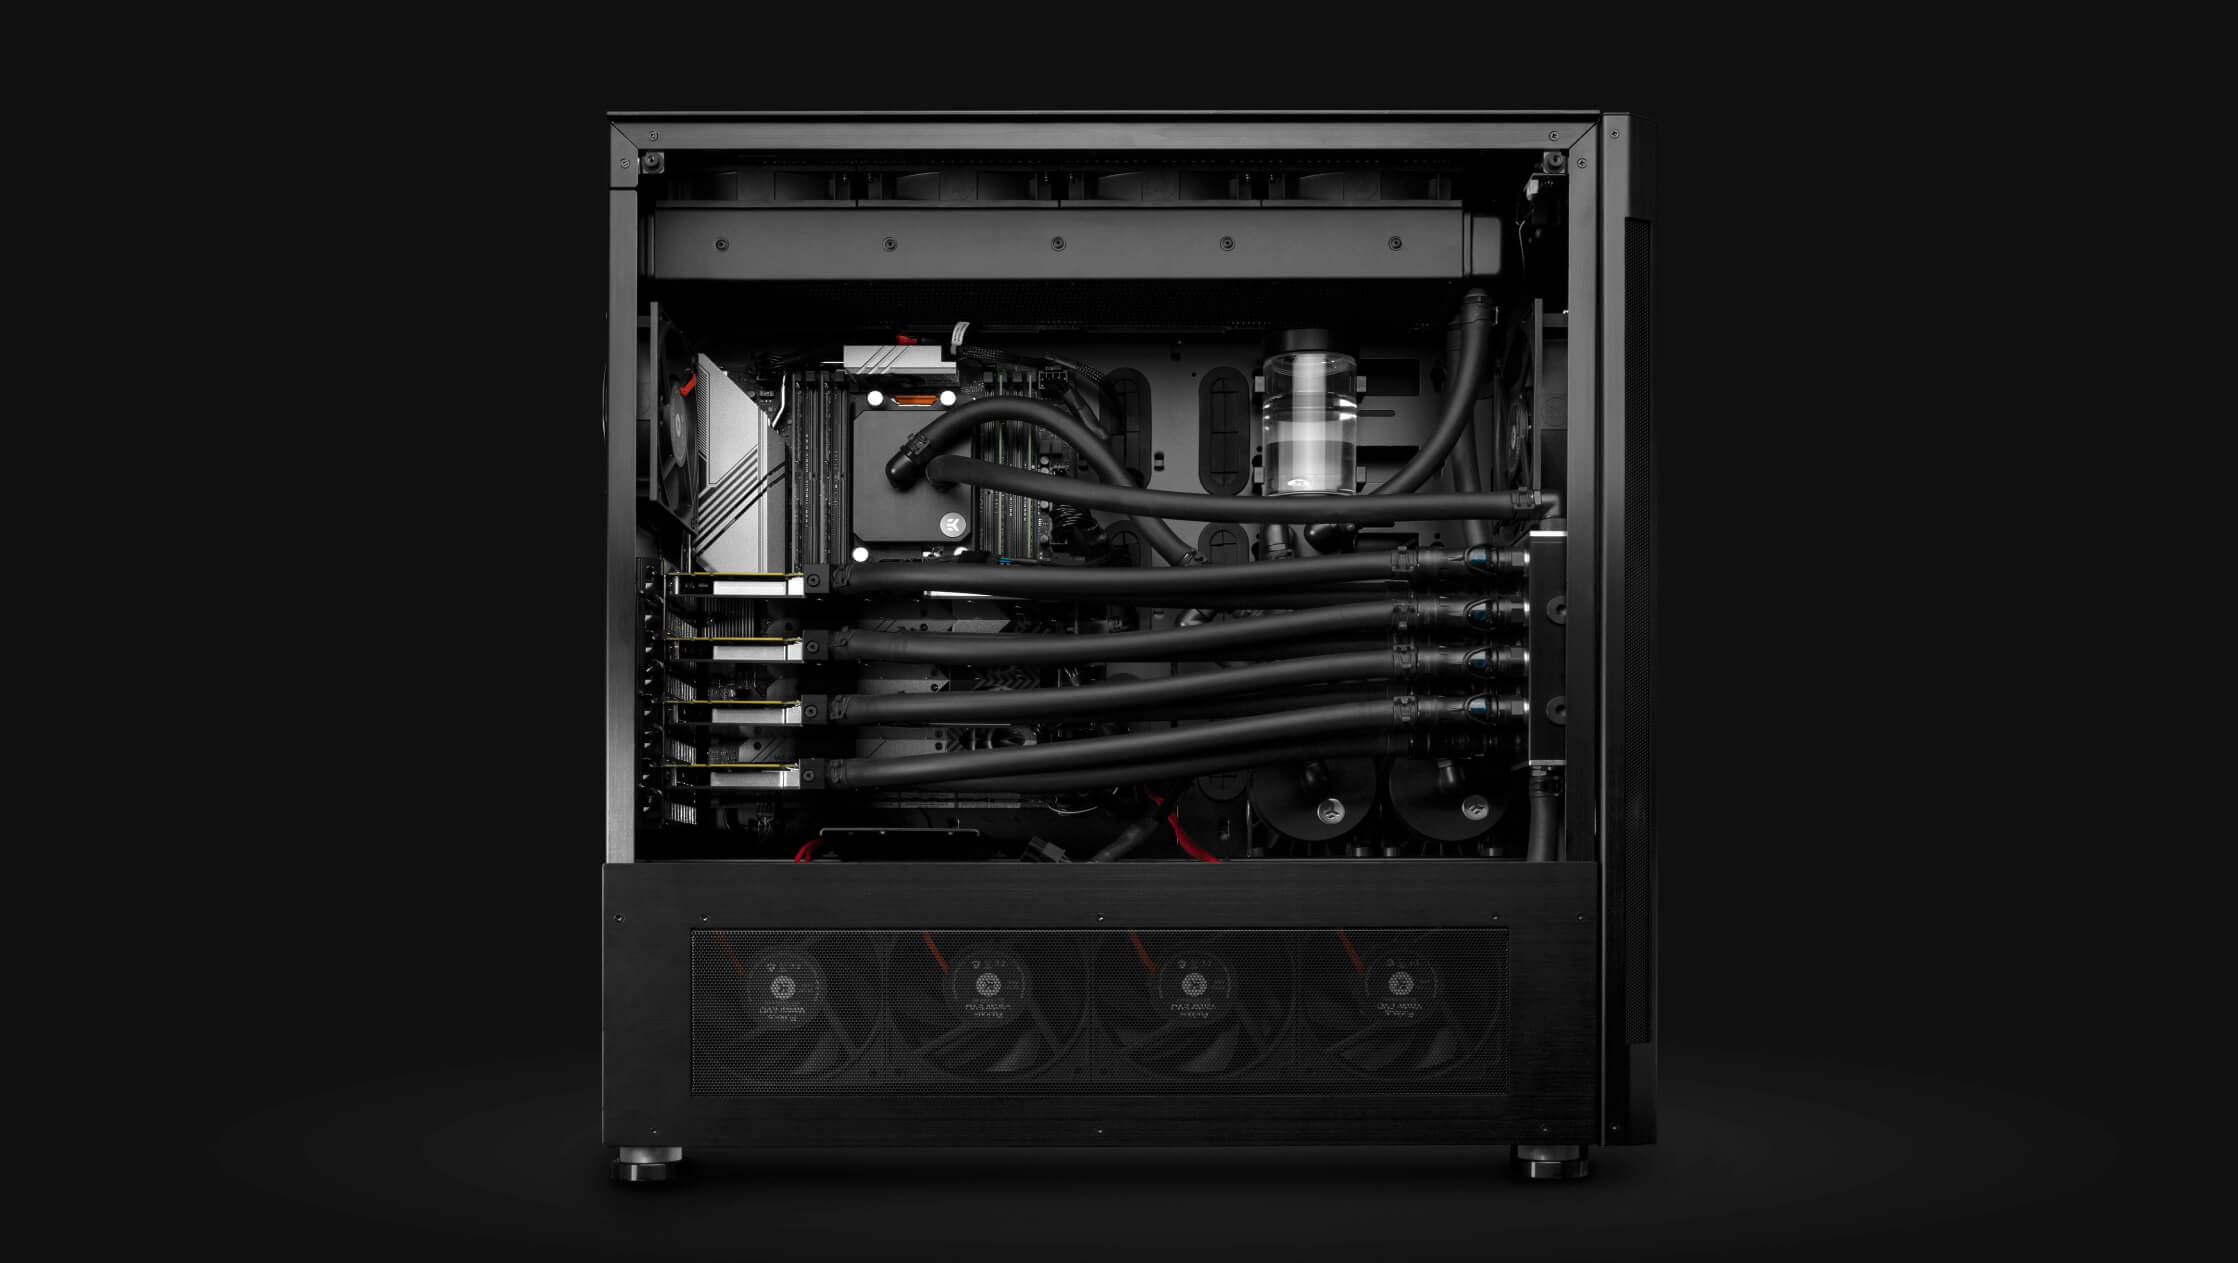 EK-Fluid Works Studio Series S5000 workstation with 4 GPUs and high-performance CPU – well beyond Houdini hardware requirements